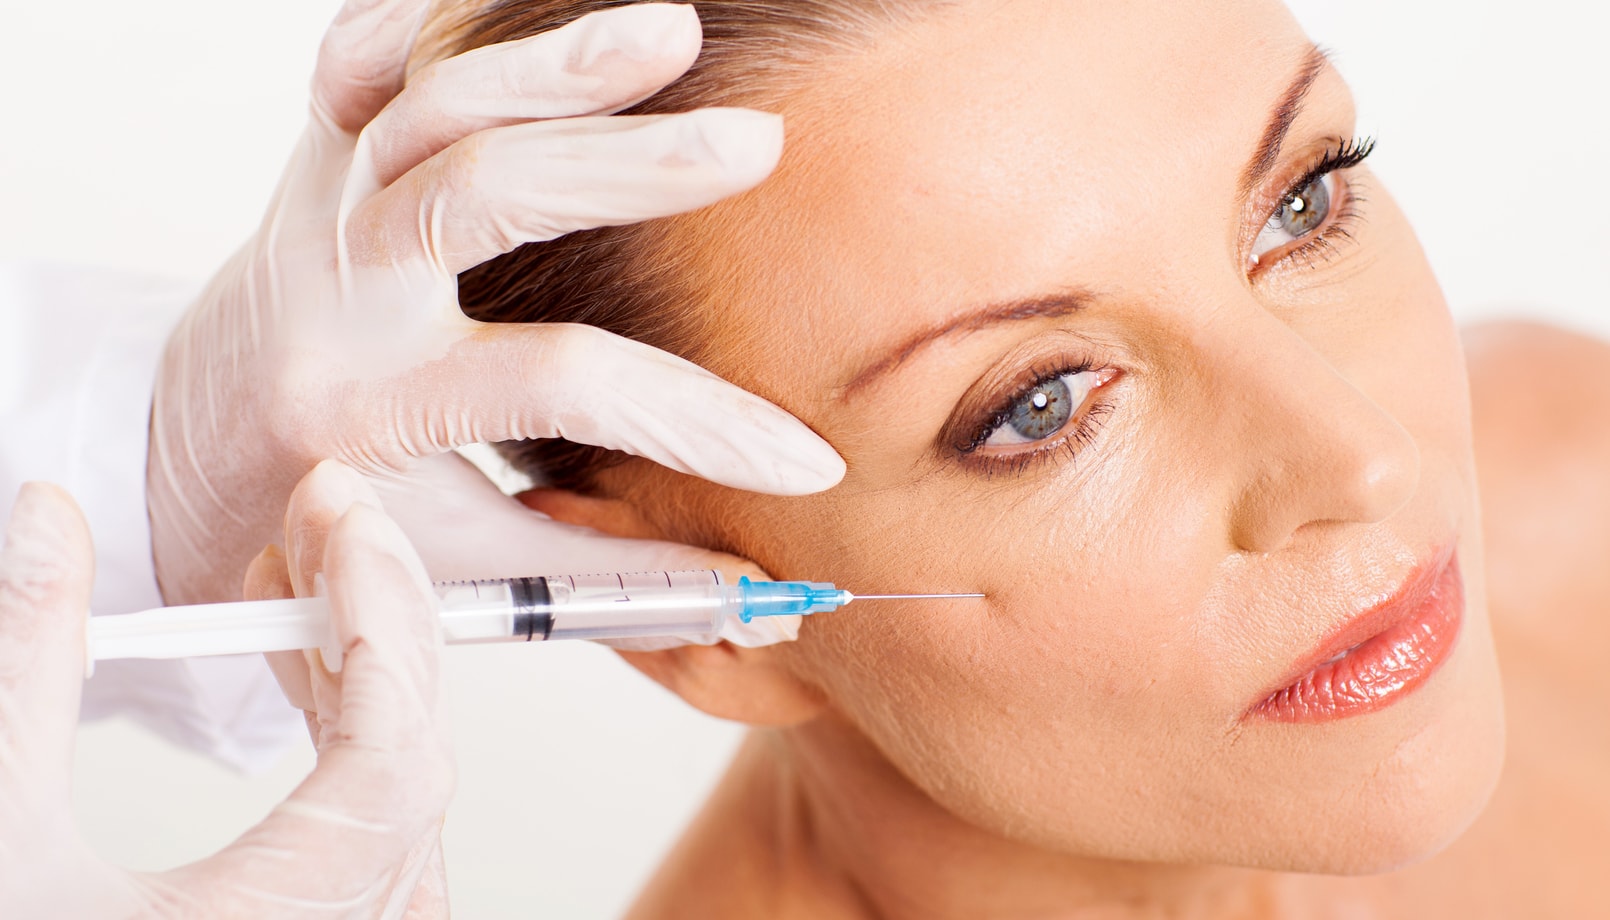 Fat Injections vs. Fillers